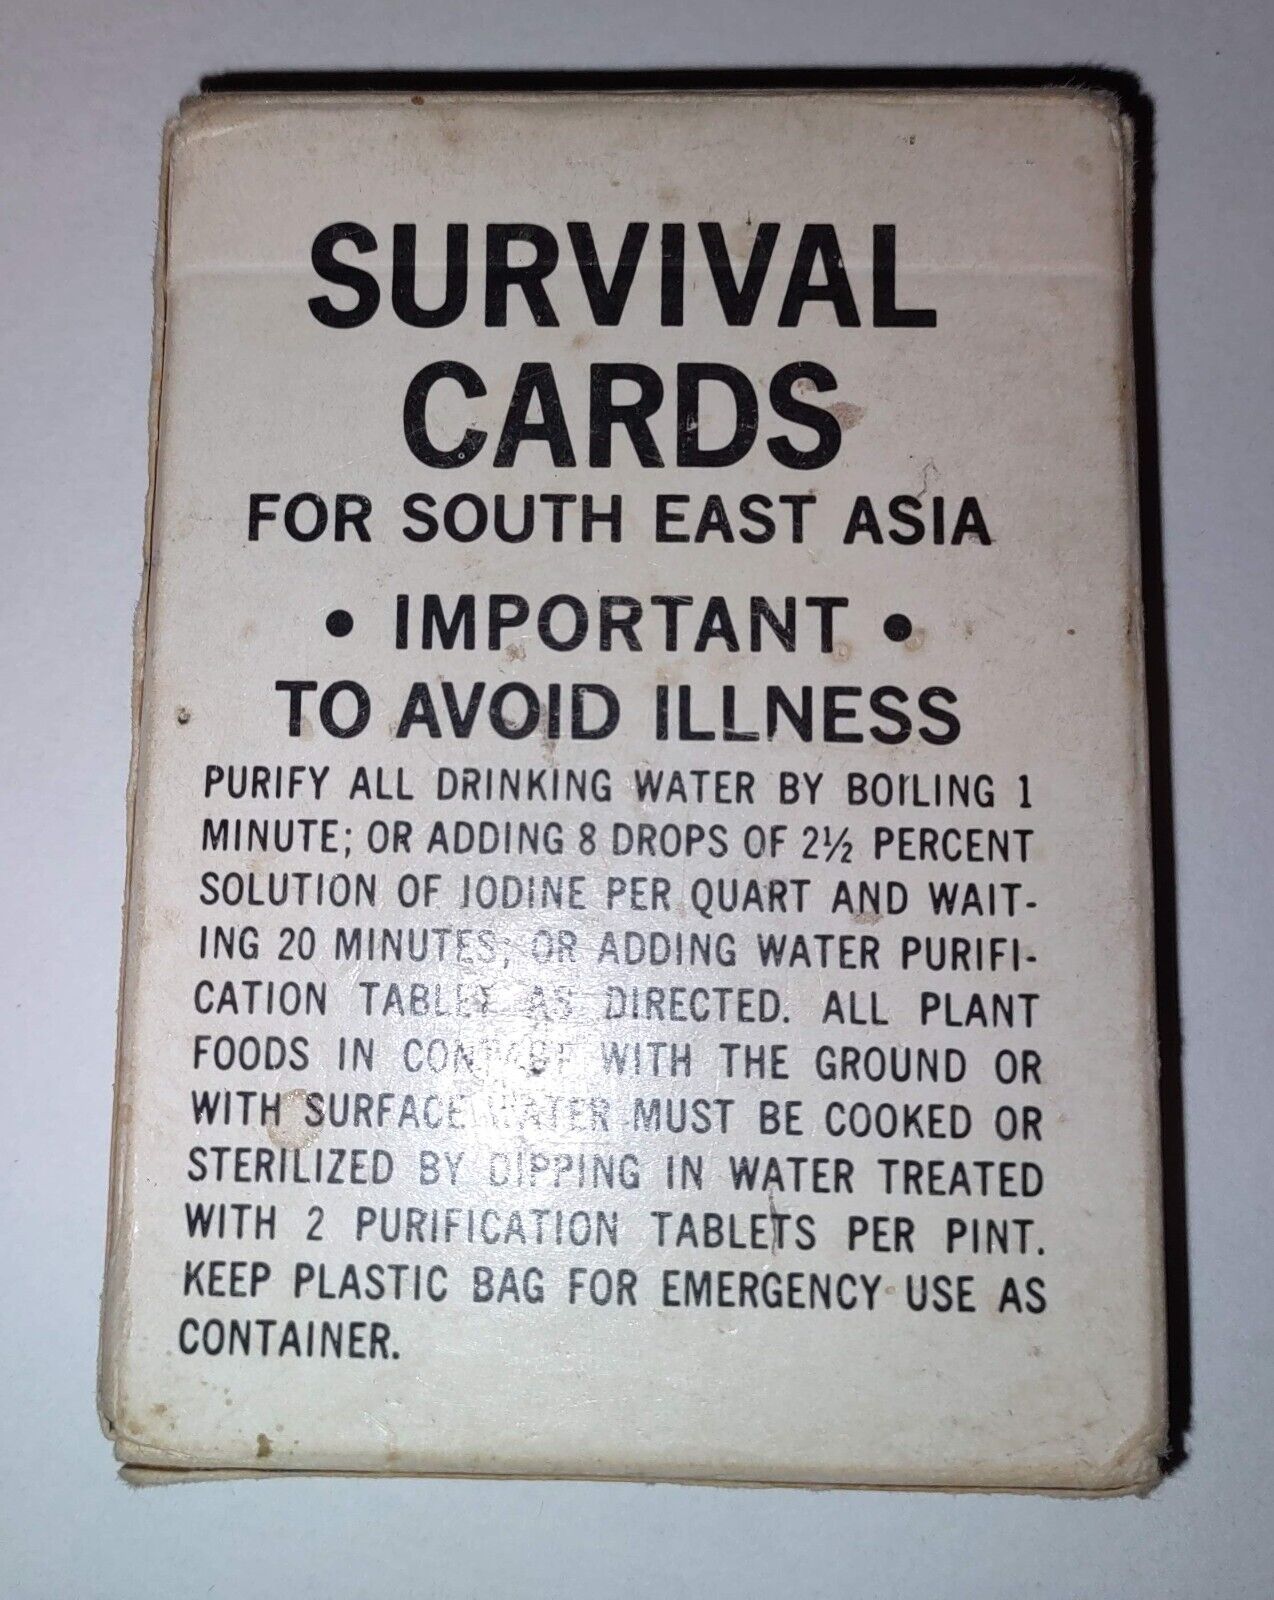 VIETNAM ERA US ARMY SURVIVAL CARDS FOR SOUTH EAST ASIA, GTA 21-7-1, 1 APR. 1968